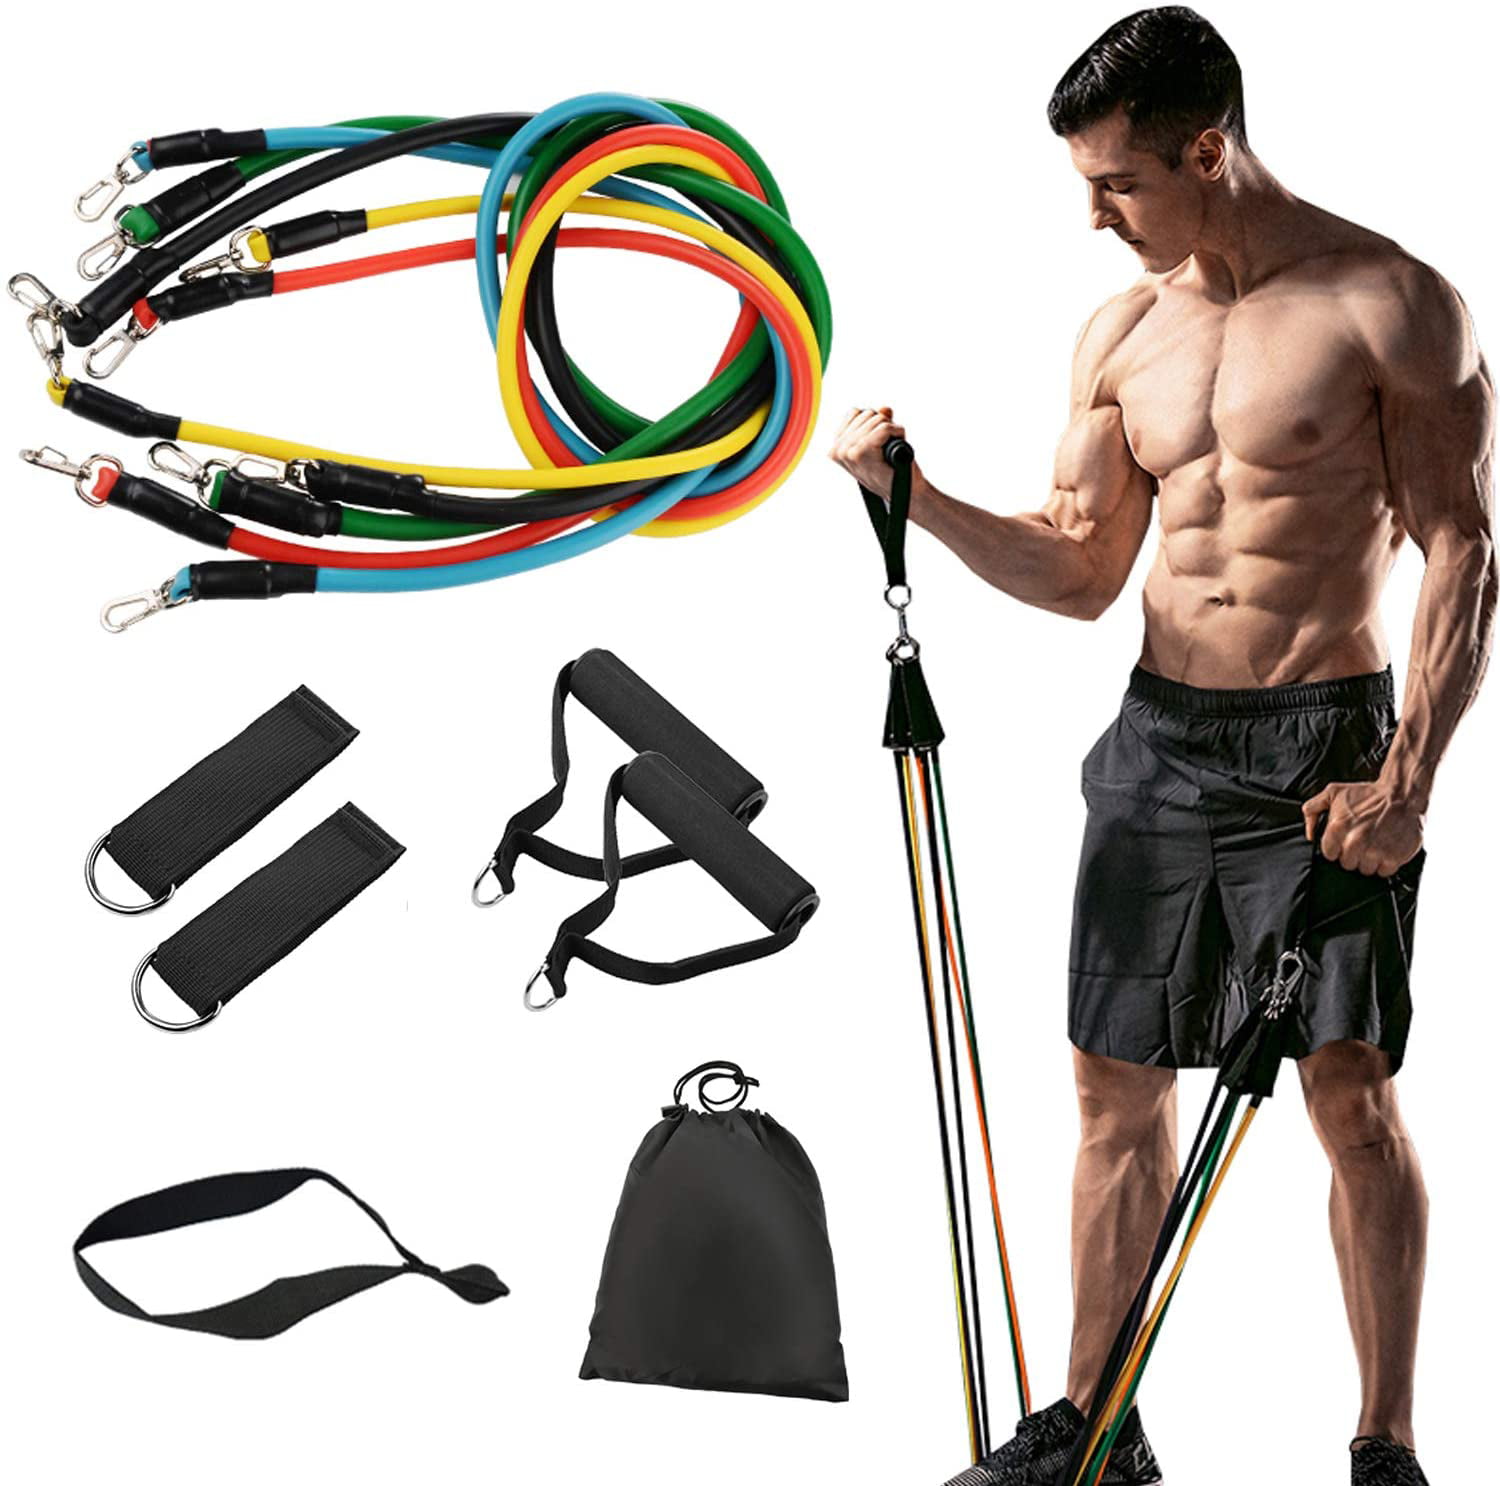 11pcs/Set Pull Rope Exercise Resistance Bands set Home Gym Equipment Fitness